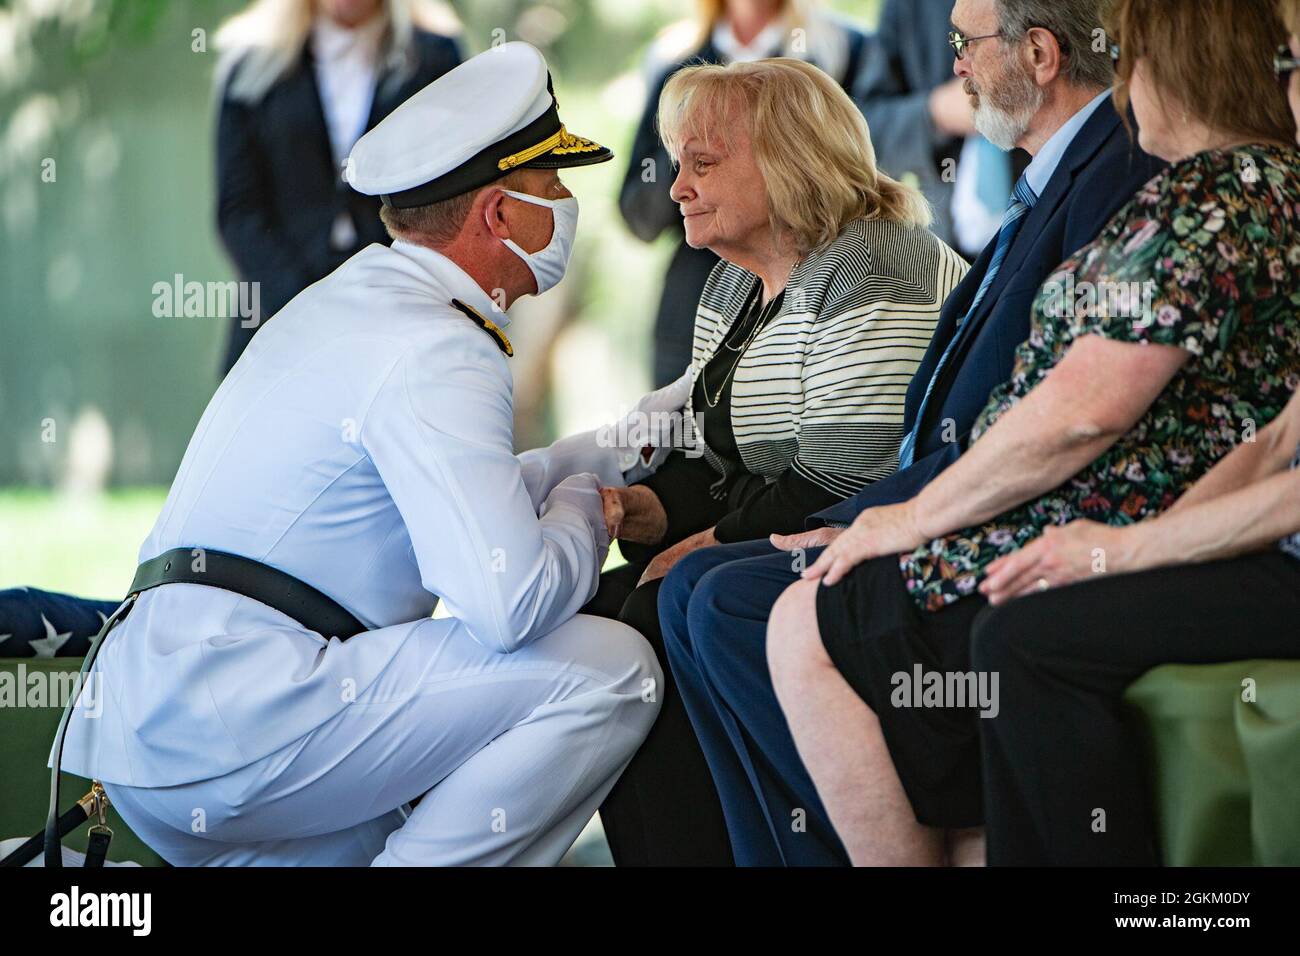 Condolences are offered to Betty Joe Griffith Price at the conclusion of the funeral service for her brother, U.S. Navy Radioman 3rd Class Thomas Griffith, in Section 60 of Arlington National Cemetery, Arlington, Virginia, May 21, 2021.     Griffith was assigned to the battleship USS Oklahoma, which was moored at Ford Island, Pearl Harbor when it was attacked by Japanese aircraft on Dec. 7, 1941 during World War II. The USS Oklahoma sustained multiple torpedo hits, which caused it to quickly capsize. The attack on the ship resulted in the deaths of 429 crewmen, including Griffith, who was 20 y Stock Photo